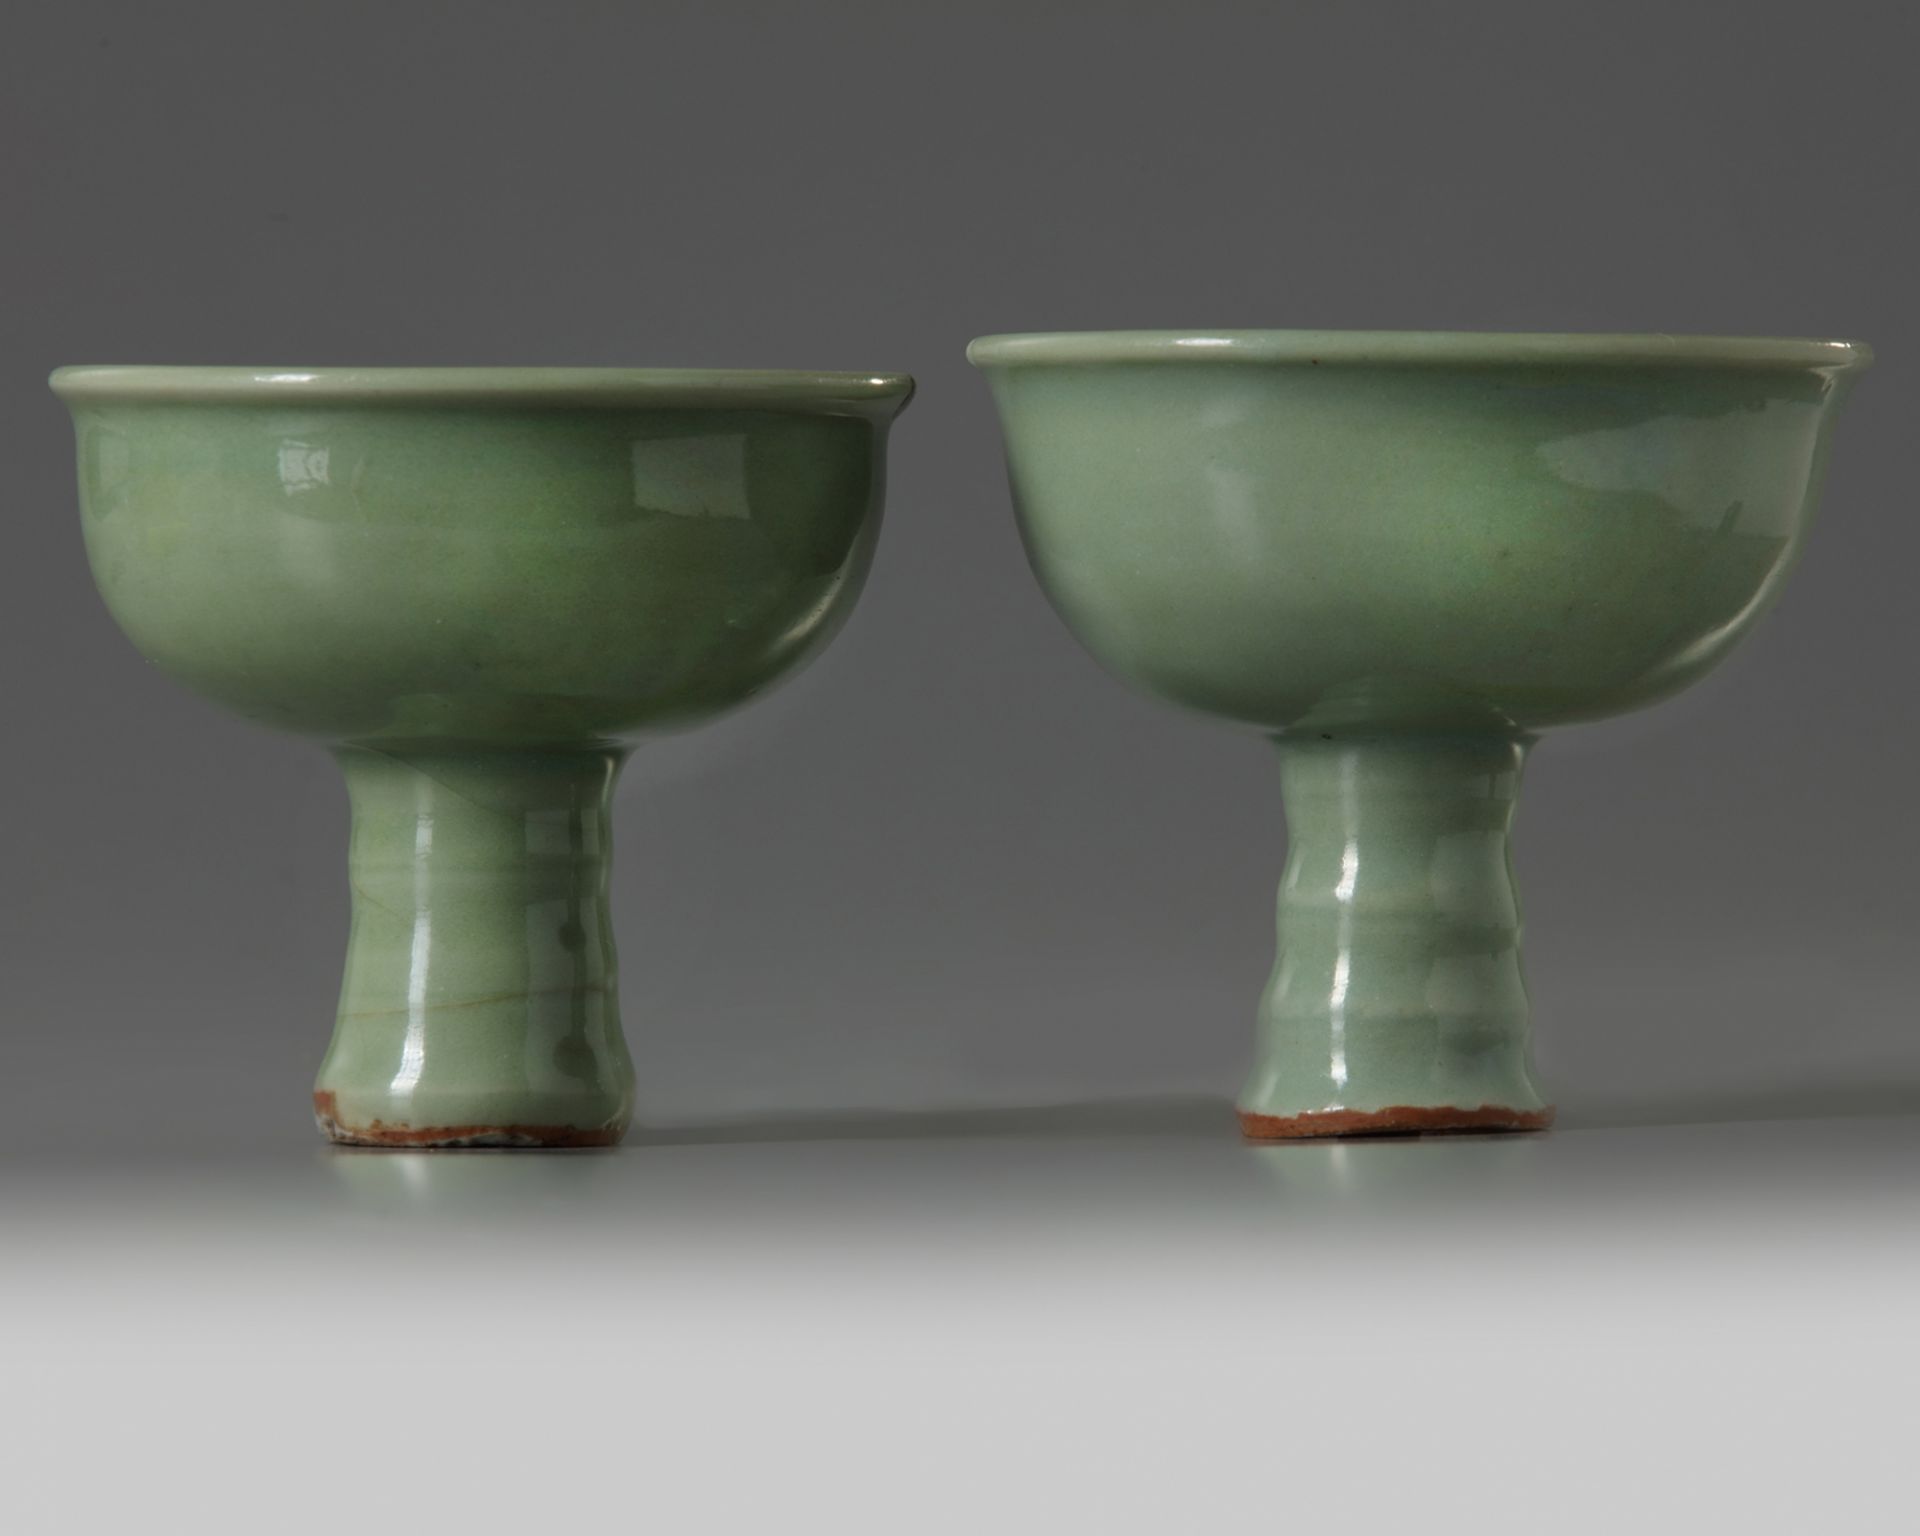 A SIMILAR PAIR OF CHINESE CELADON GLAZED STEMCUPS, LATE YUAN, EARLY MING DYNASTY, 14TH CENTURY - Bild 2 aus 5